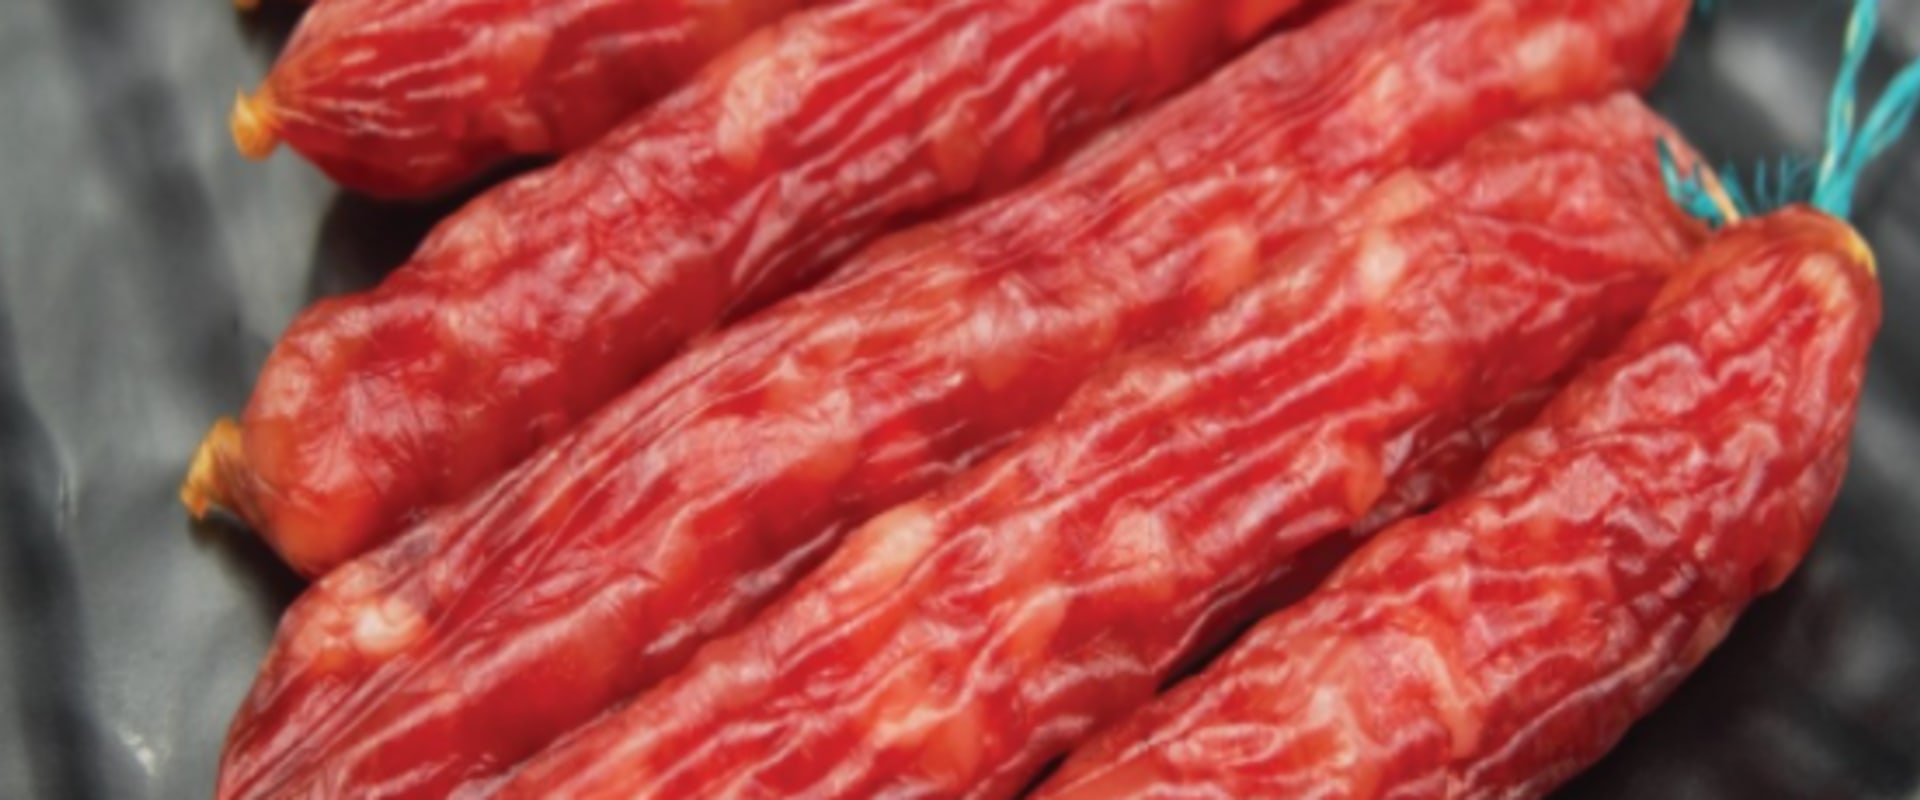 Why is chinese sausage so red?